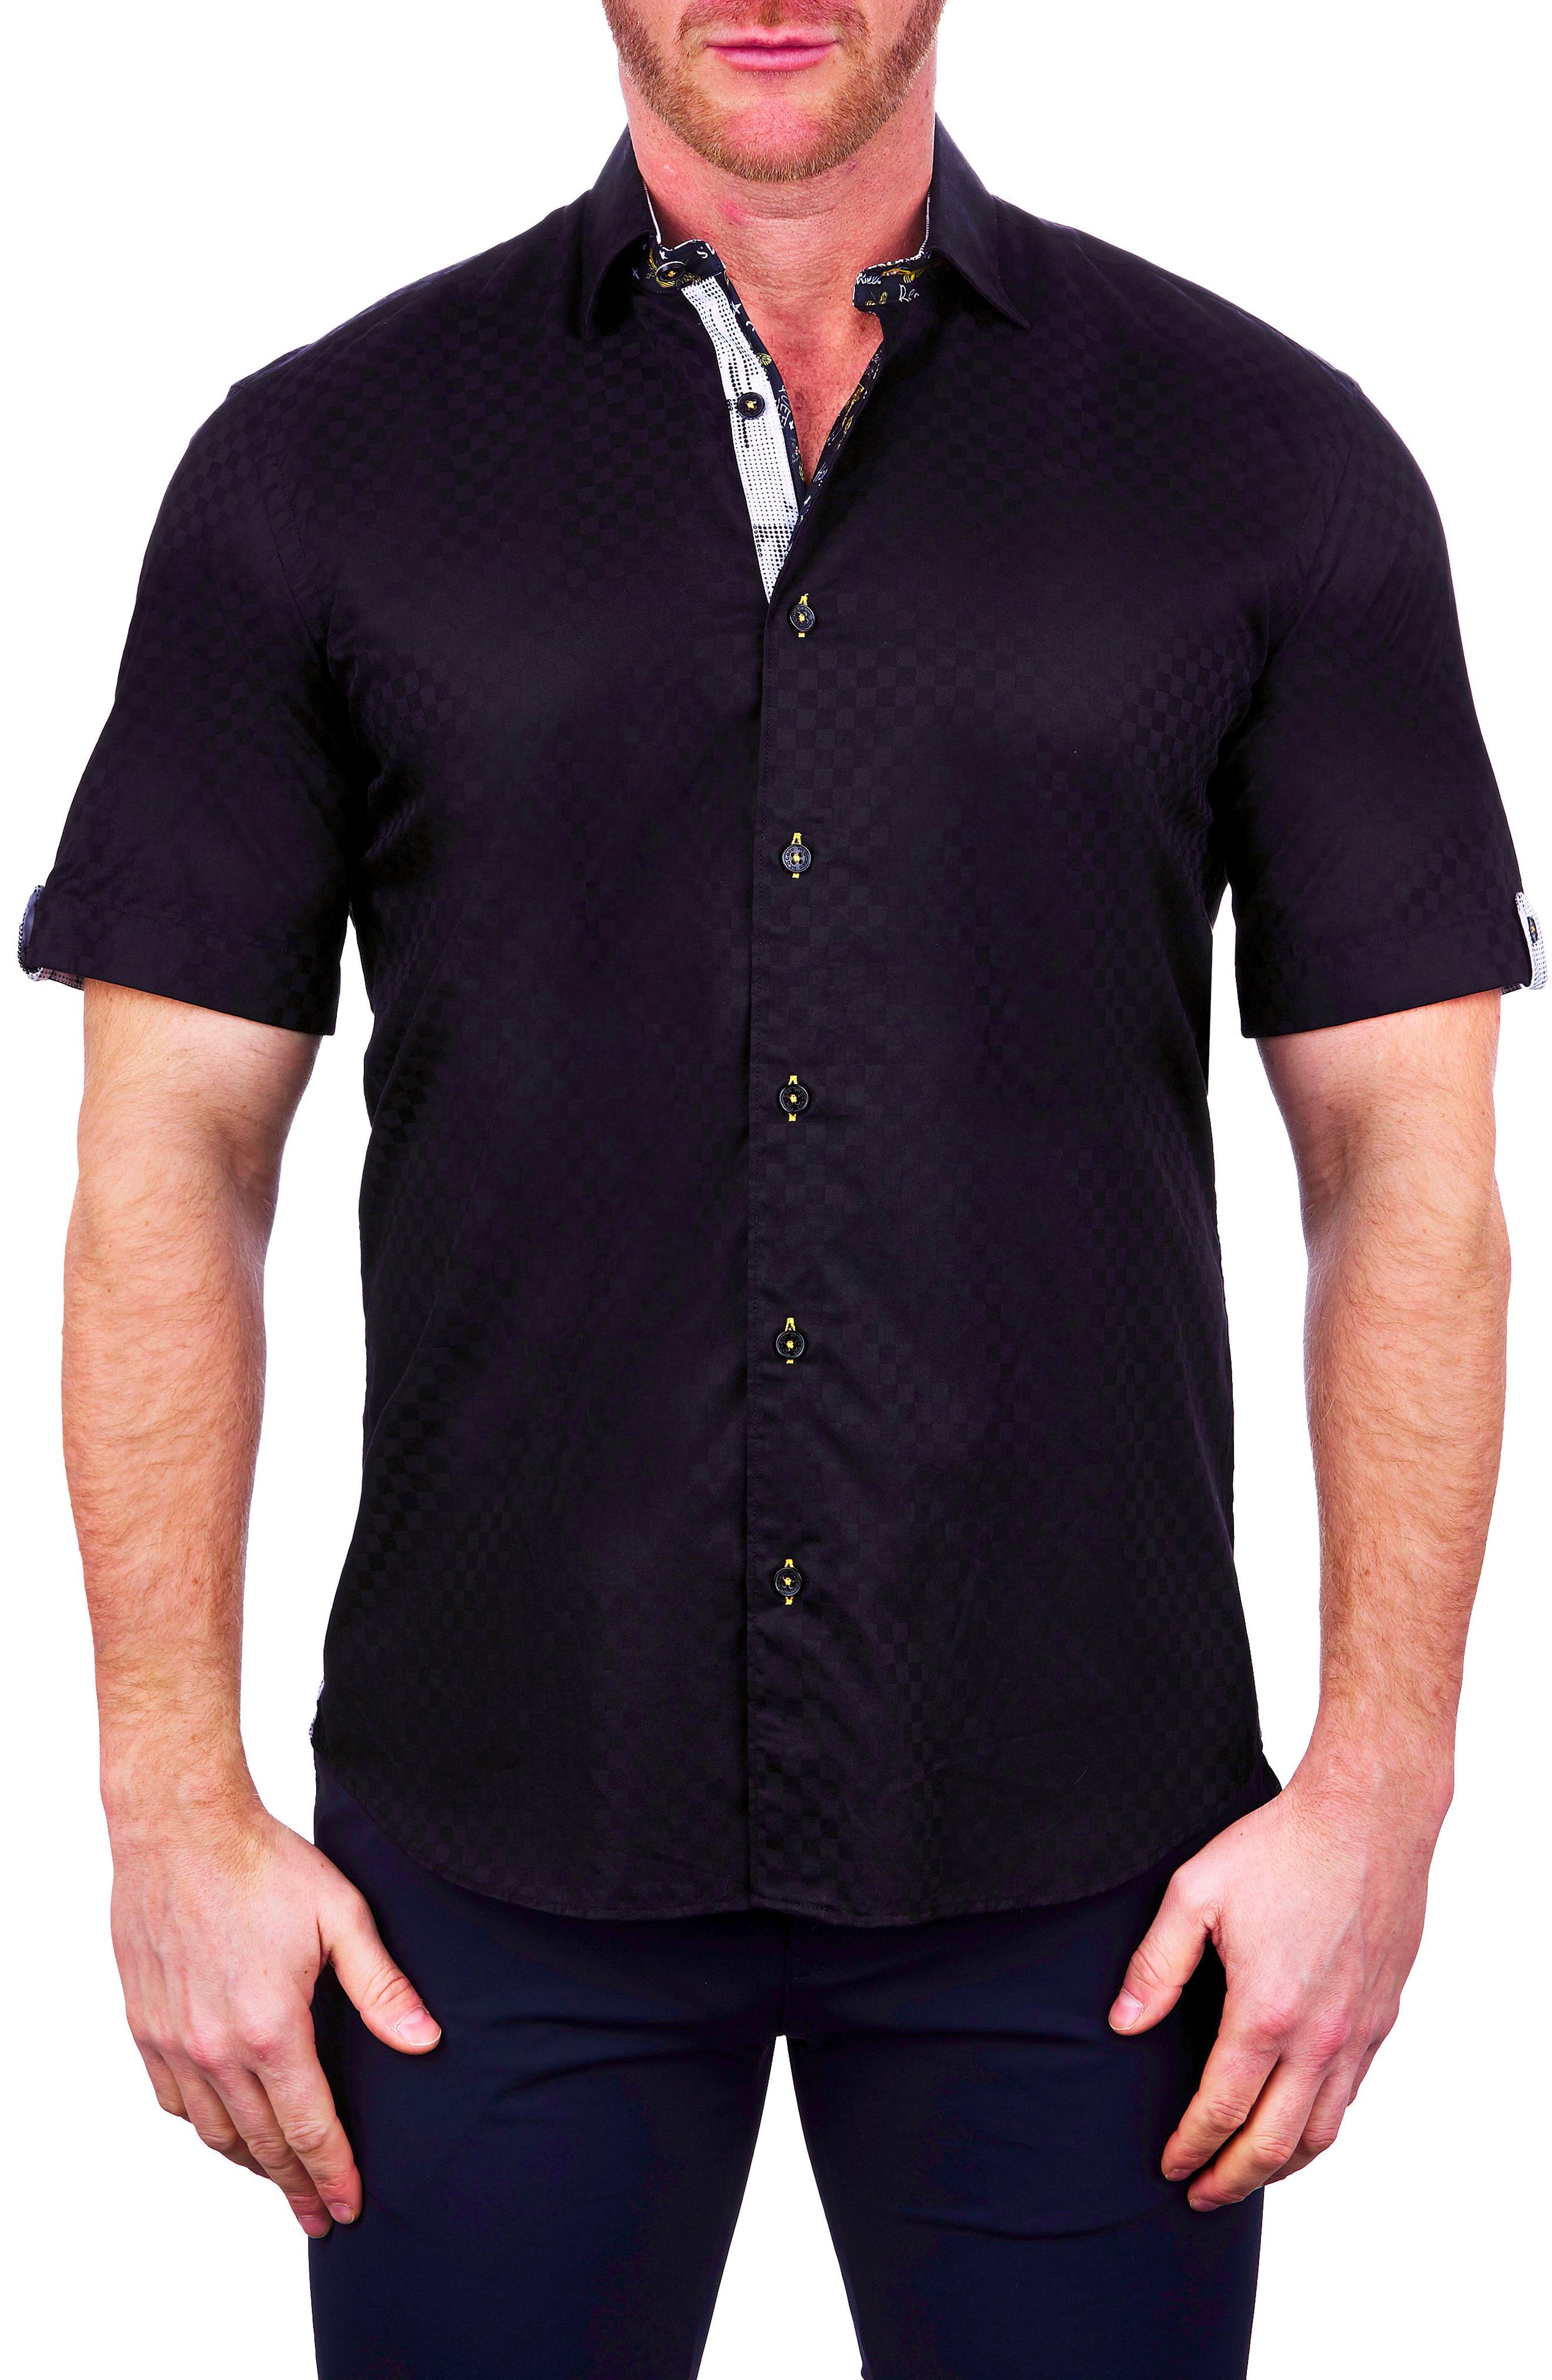 red and black button up shirt mens